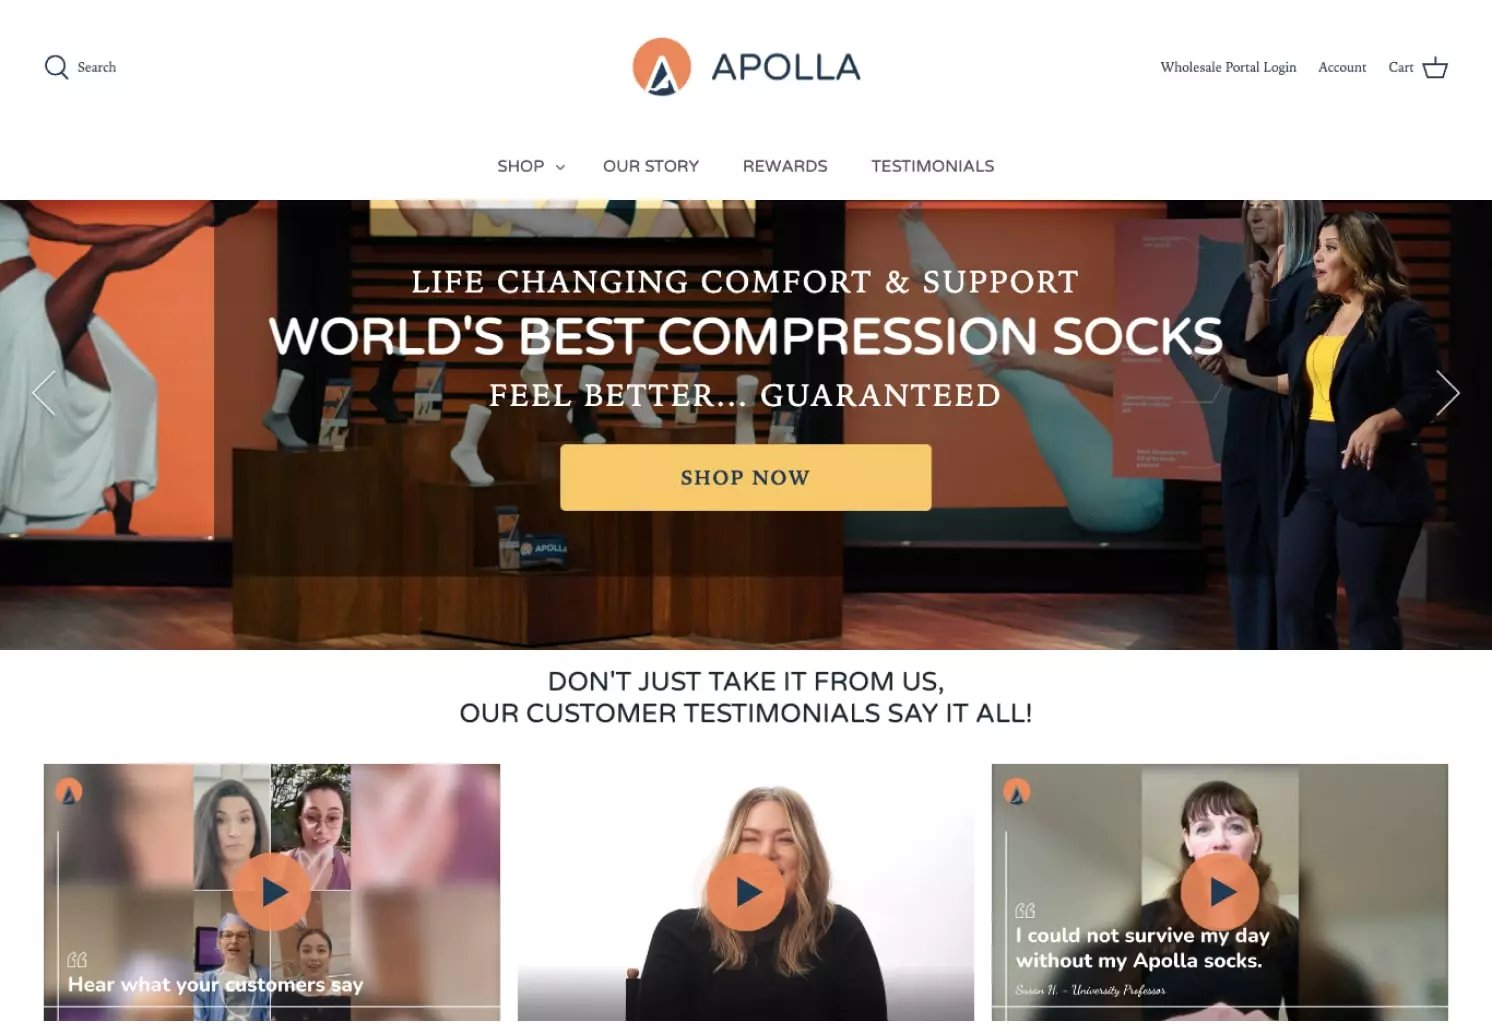 Apolla report on case study performance with Videowise shoppable videos